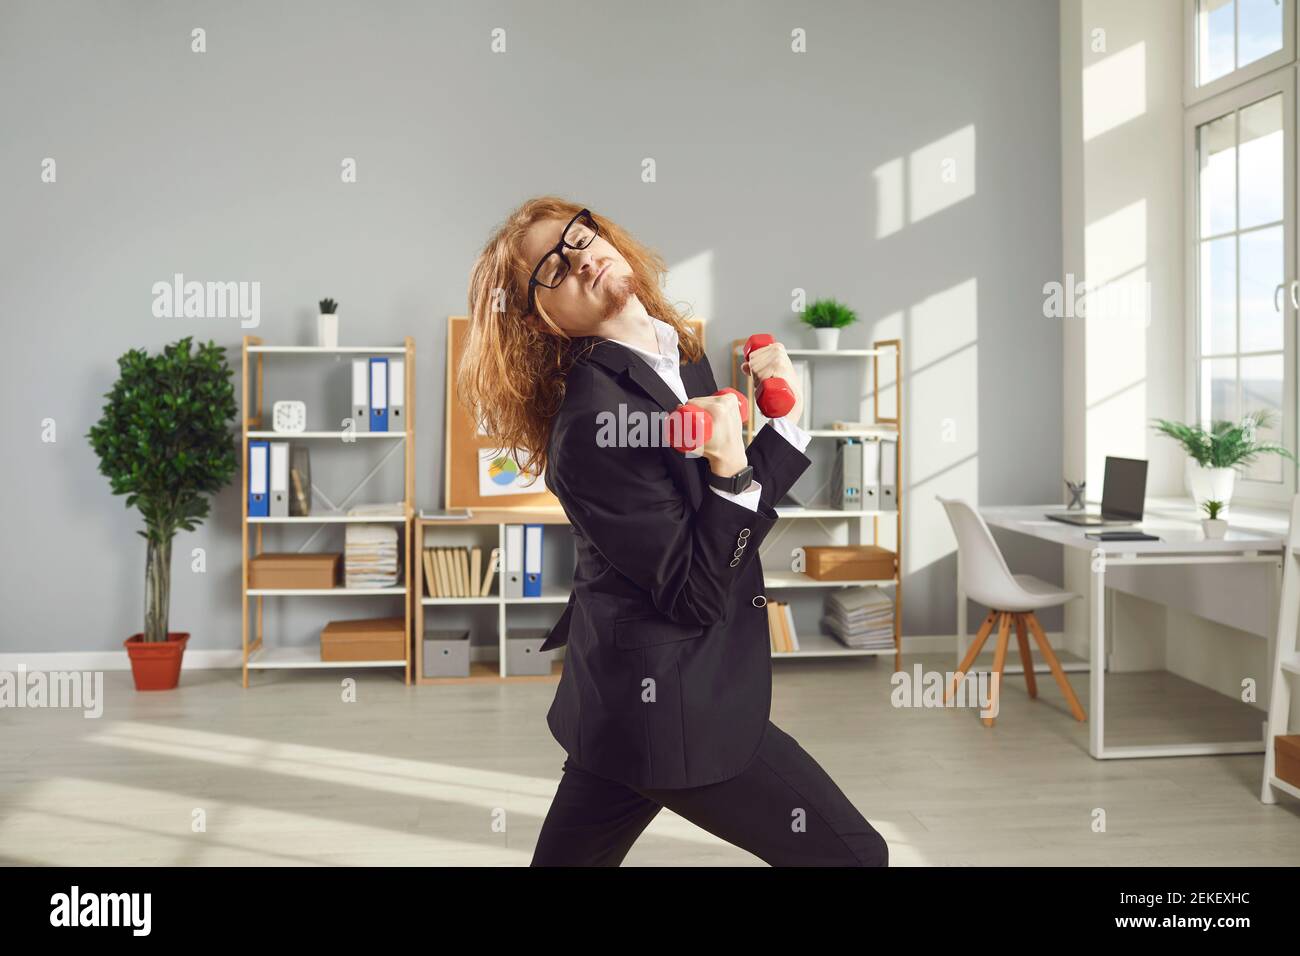 Funny businessman or office worker leading hectic busy lifestyle but keeping fit anyway Stock Photo